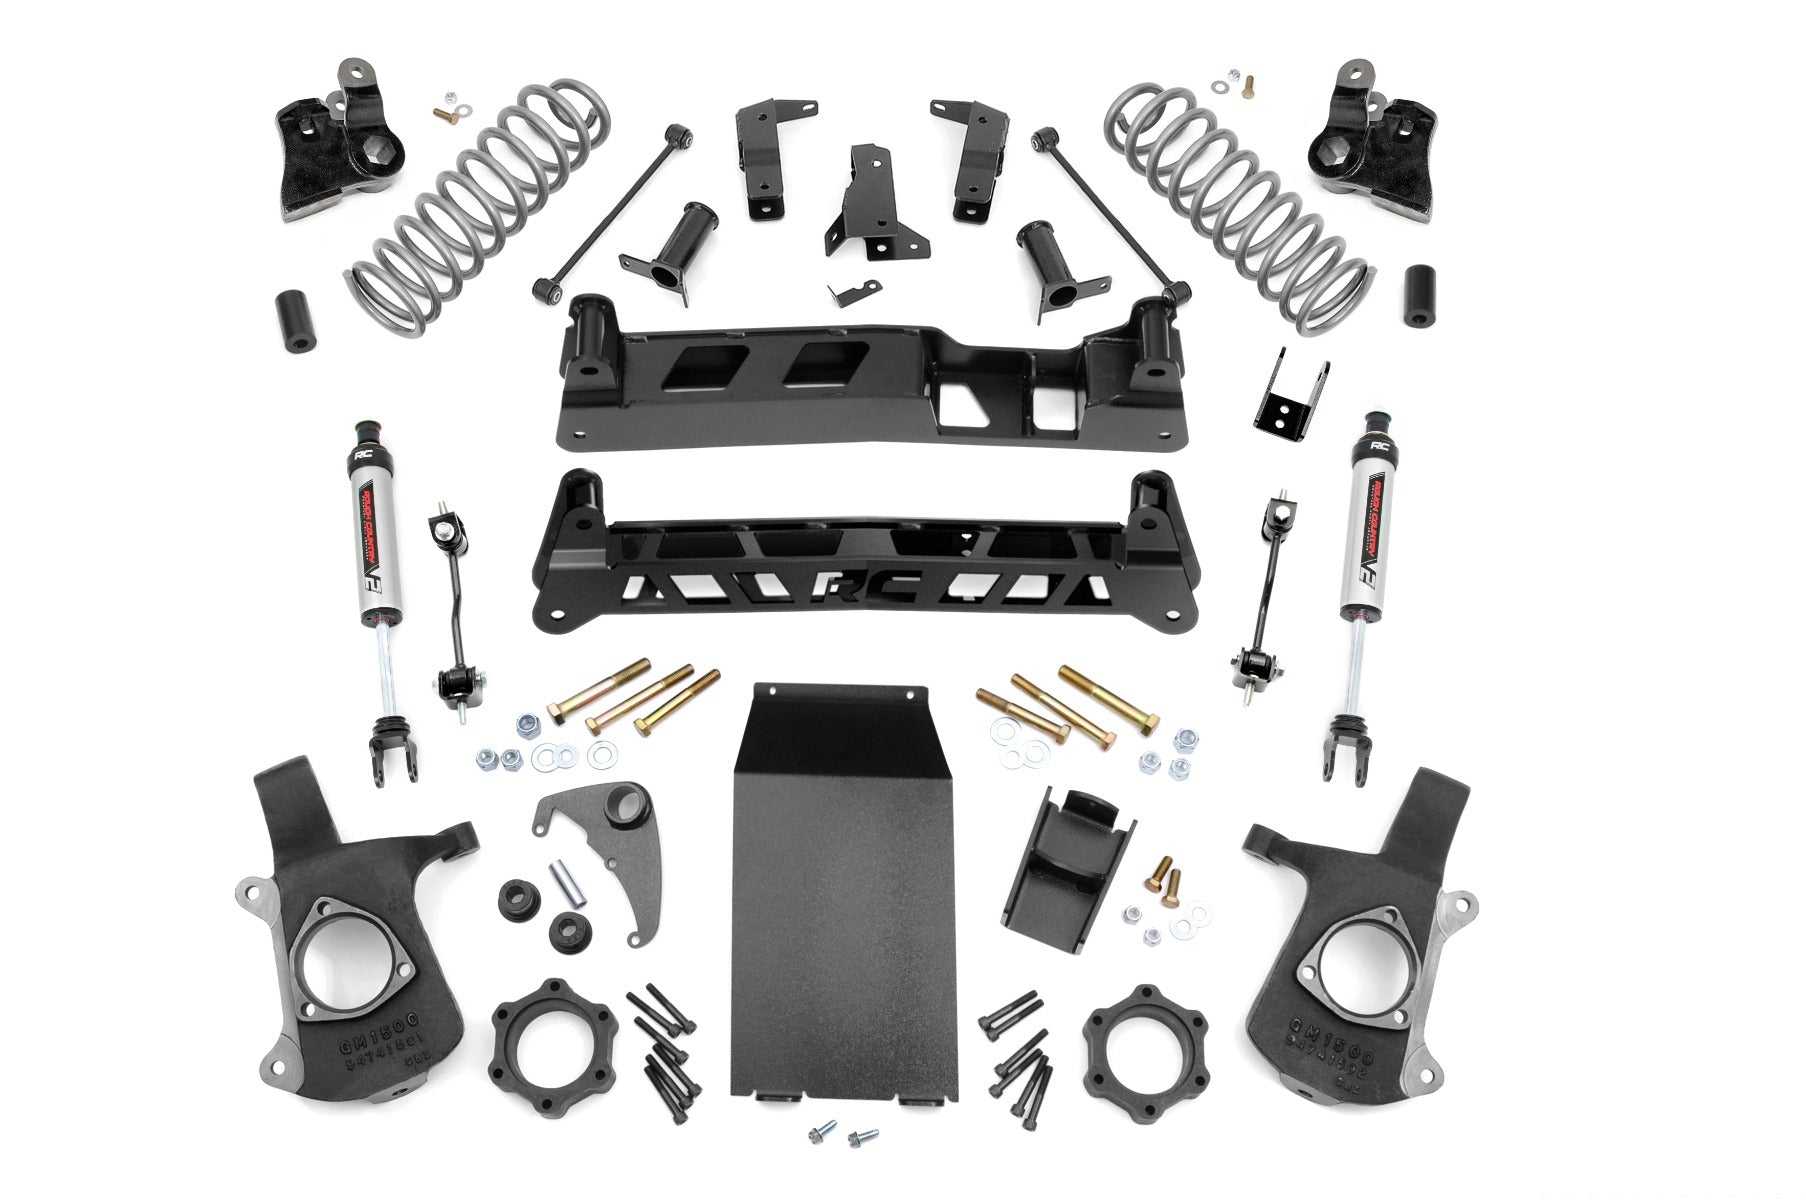 Pays rude, Rough Country Lift Kit Chevy Tahoe 2WD/4WD (00-06) 6" Lift - Non-Torsion Bar Drop Kits